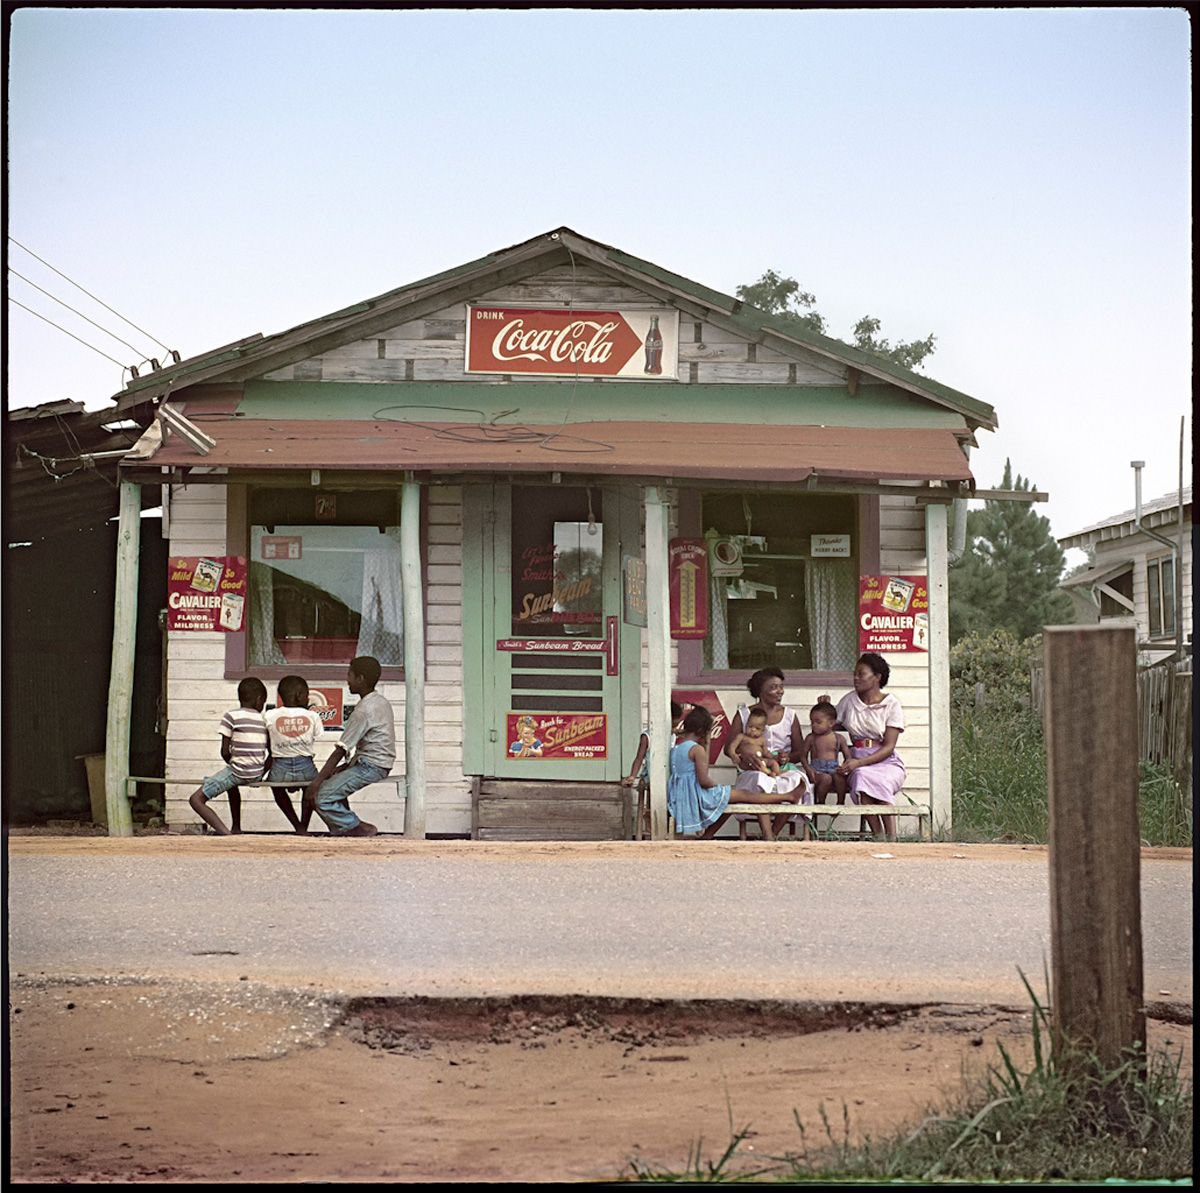 RT @blackityblvck: Alabama (1956)

Photographed by Gordon Parks https://t.co/VjhTPq0Hpq